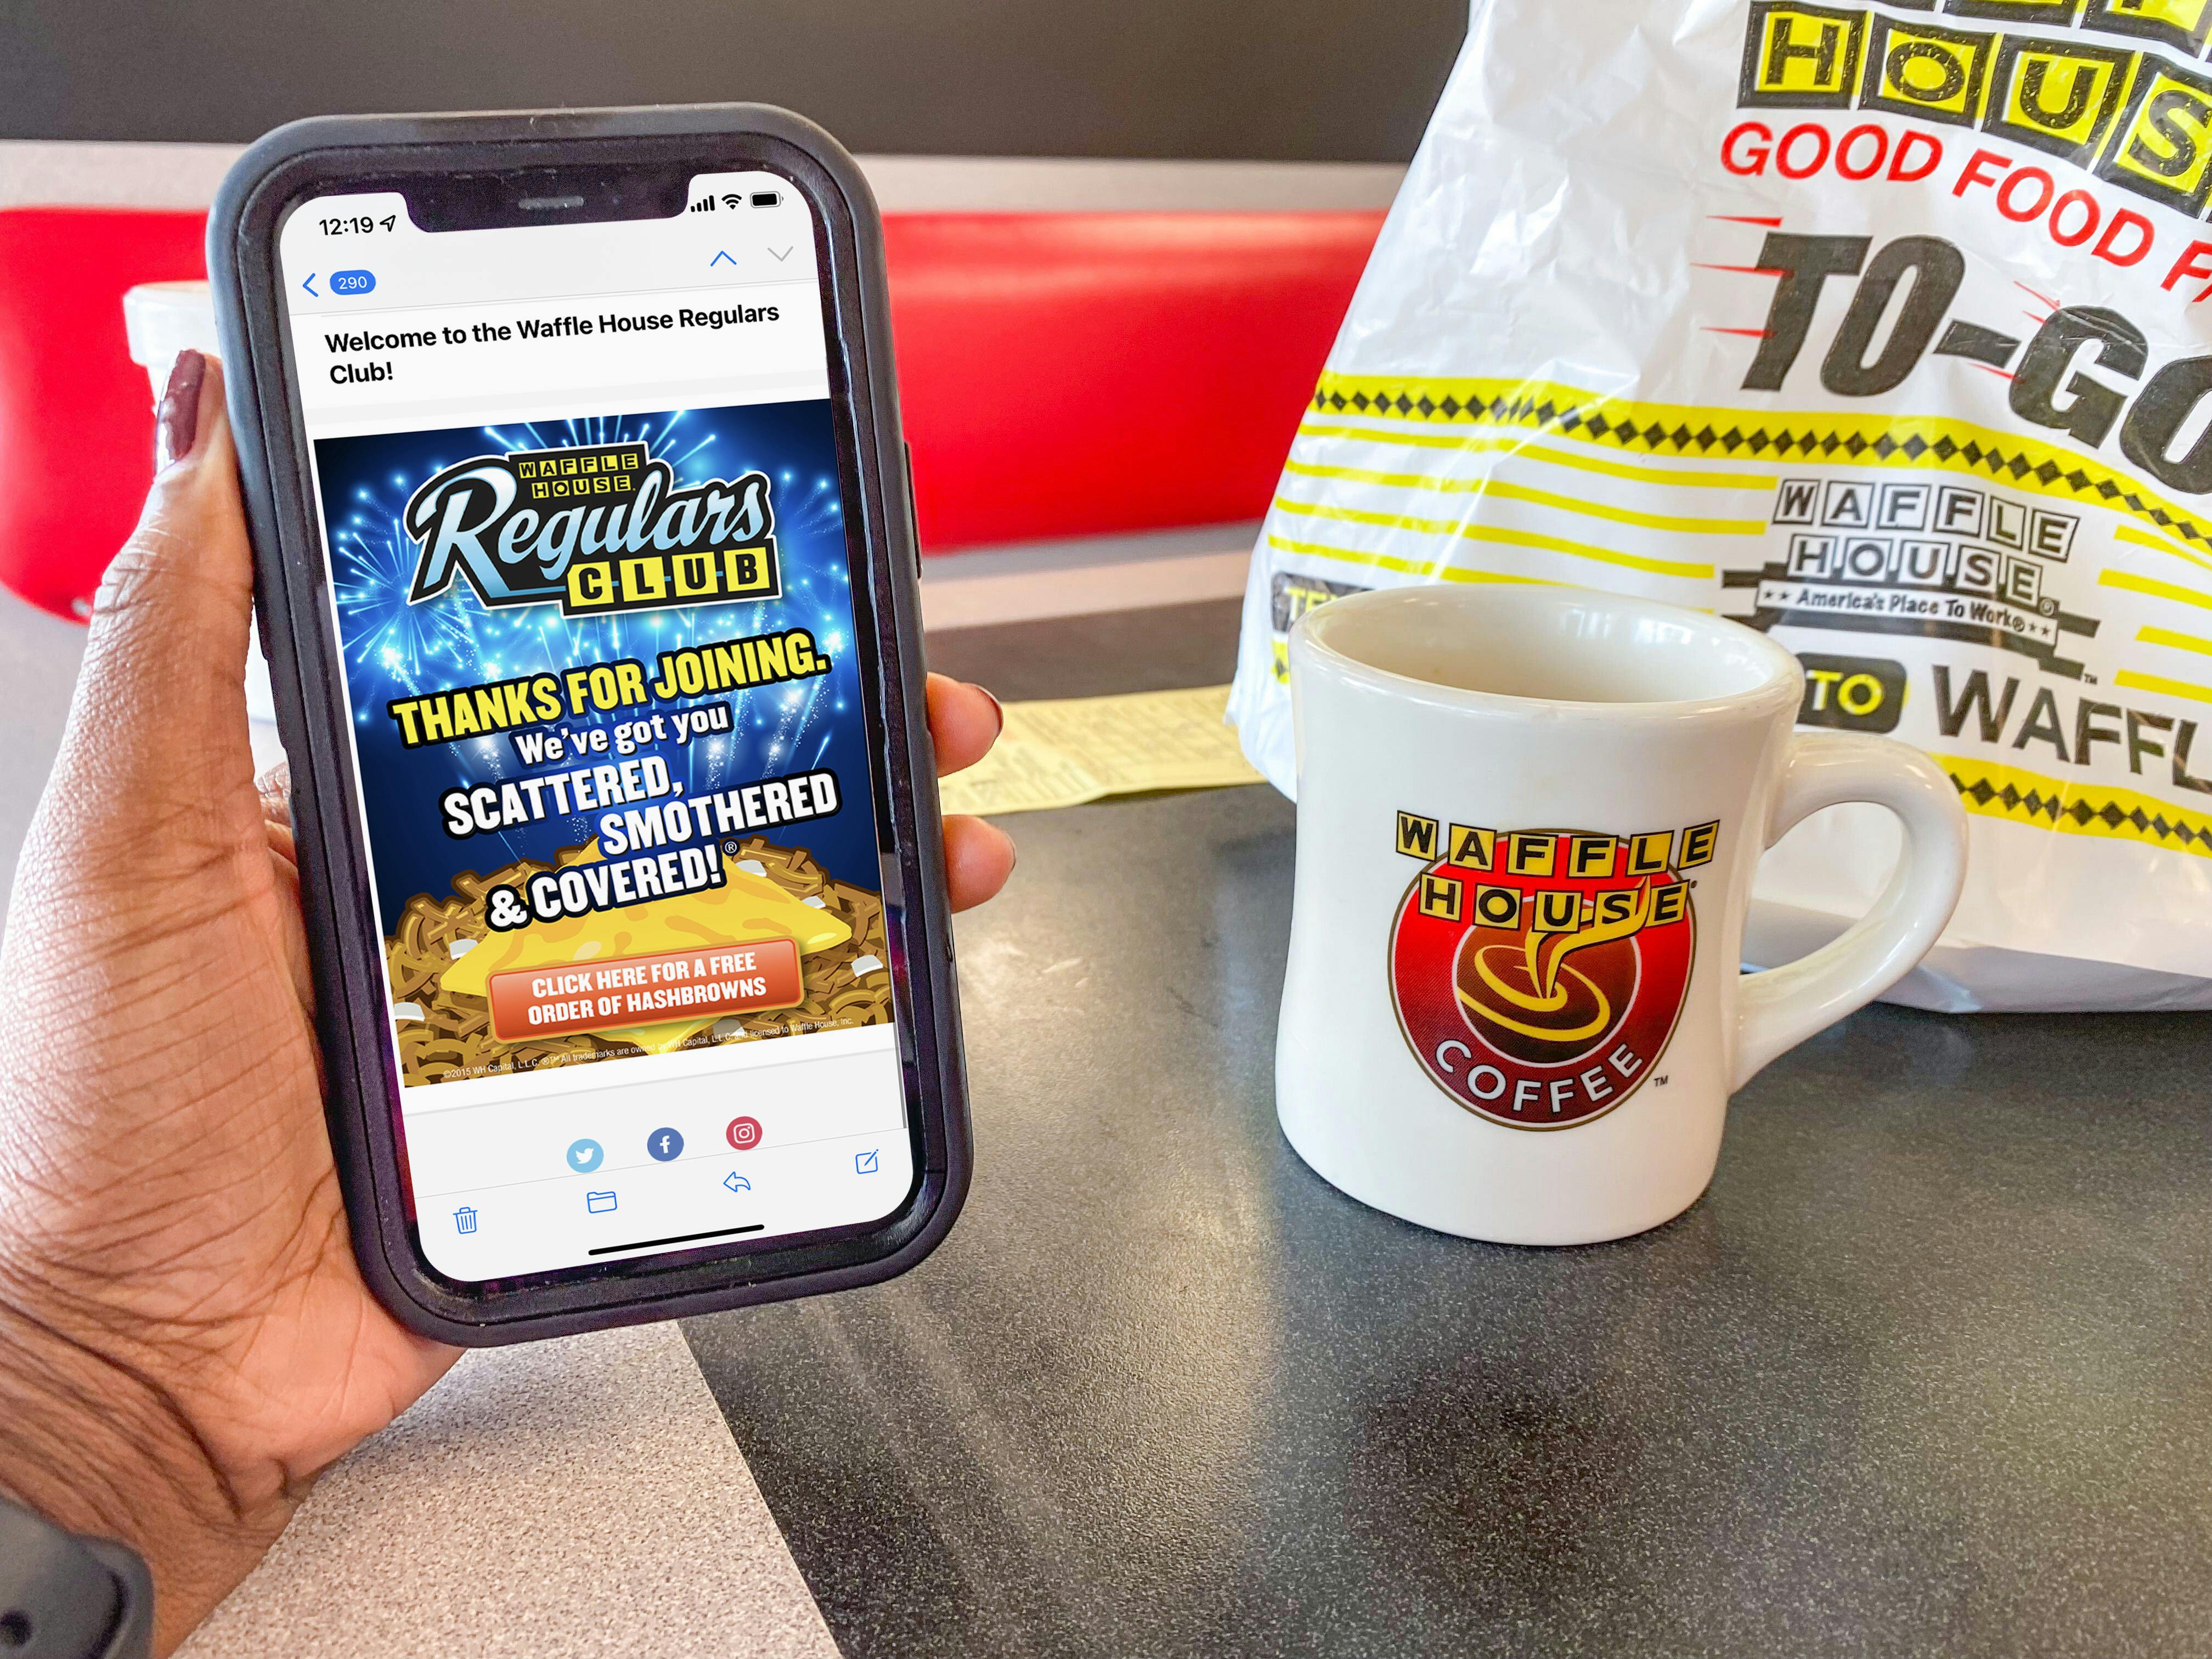 A person's hand holding a cell phone displaying a welcome email from Waffle House Regular Club in front of a Waffle House mug and to-go bag.